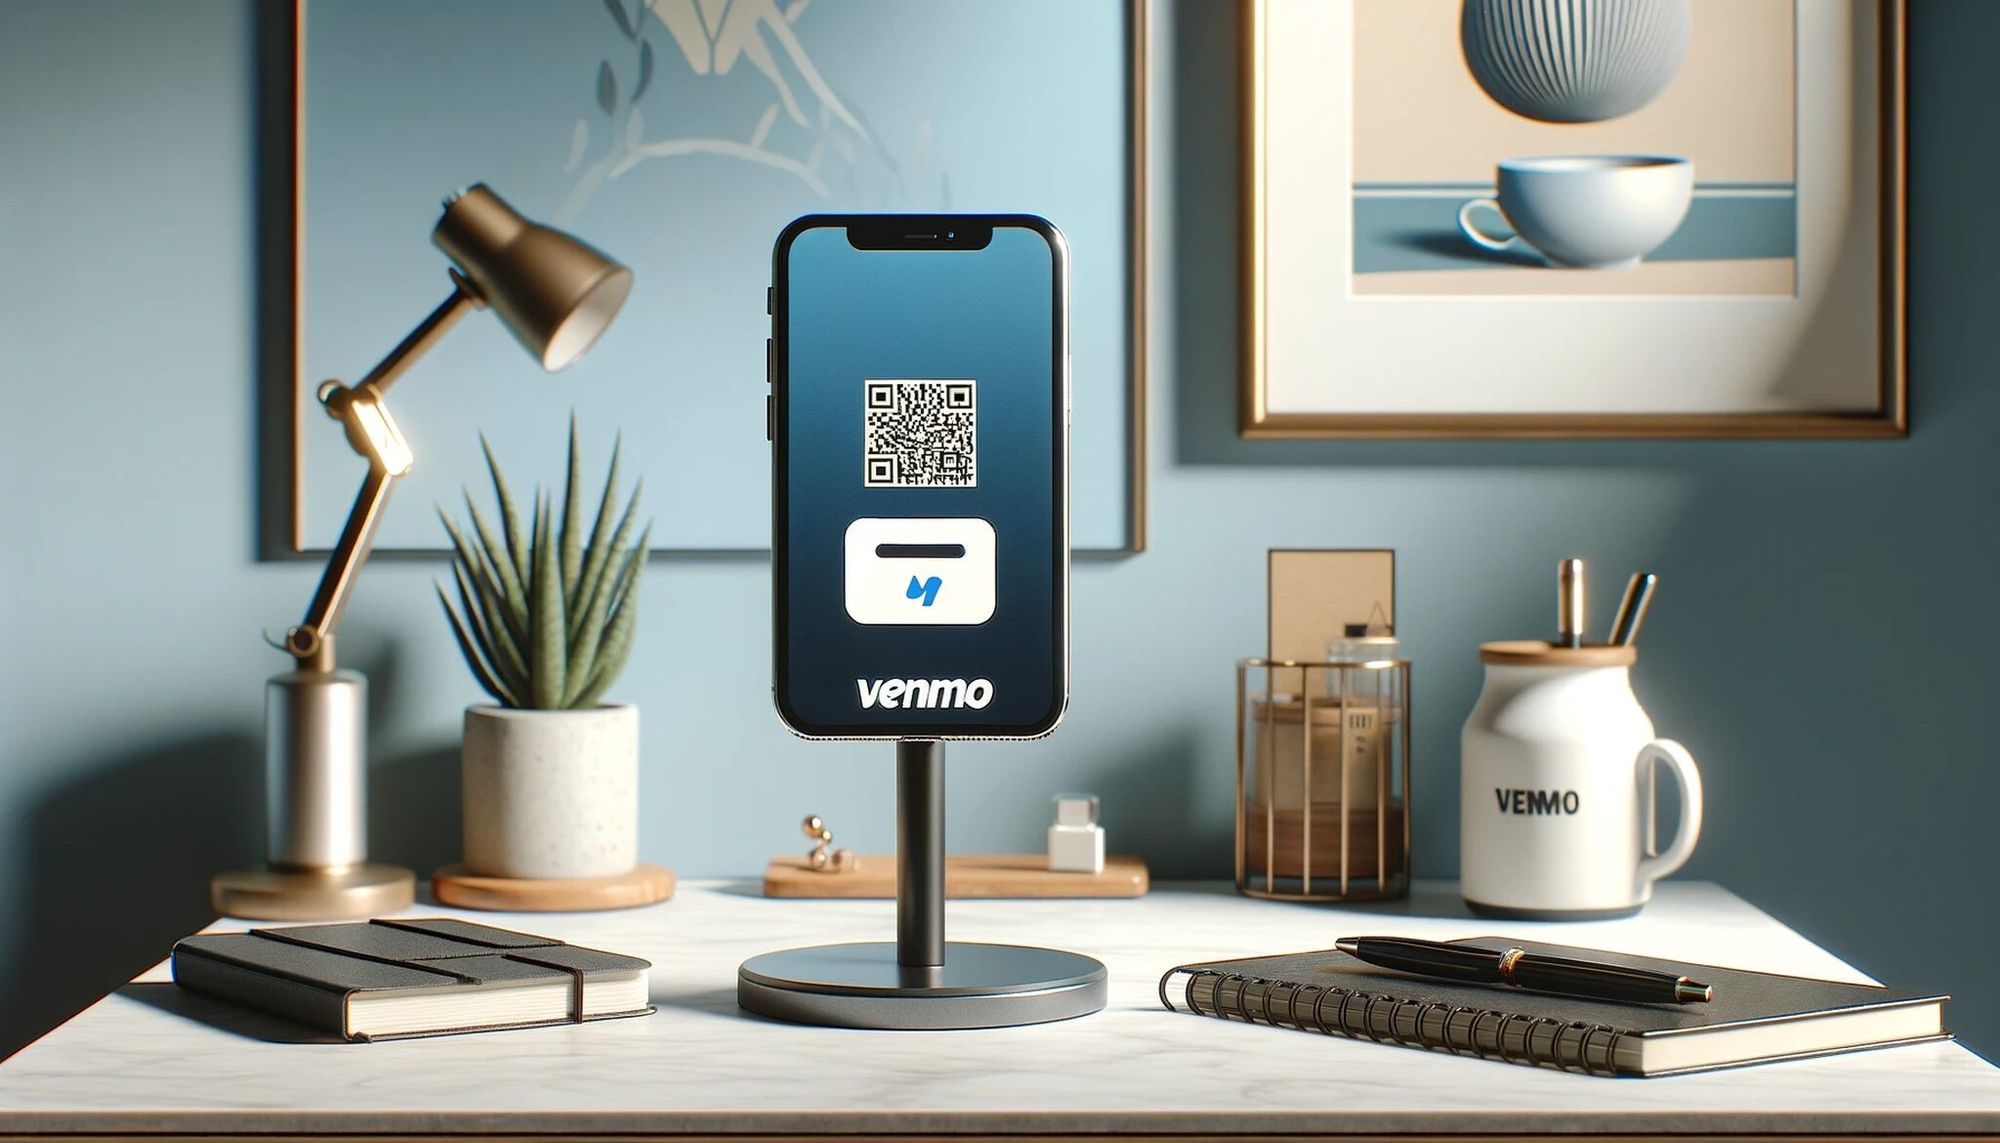 workspace with a smartphone on a sleek stand displaying a Venmo QR code